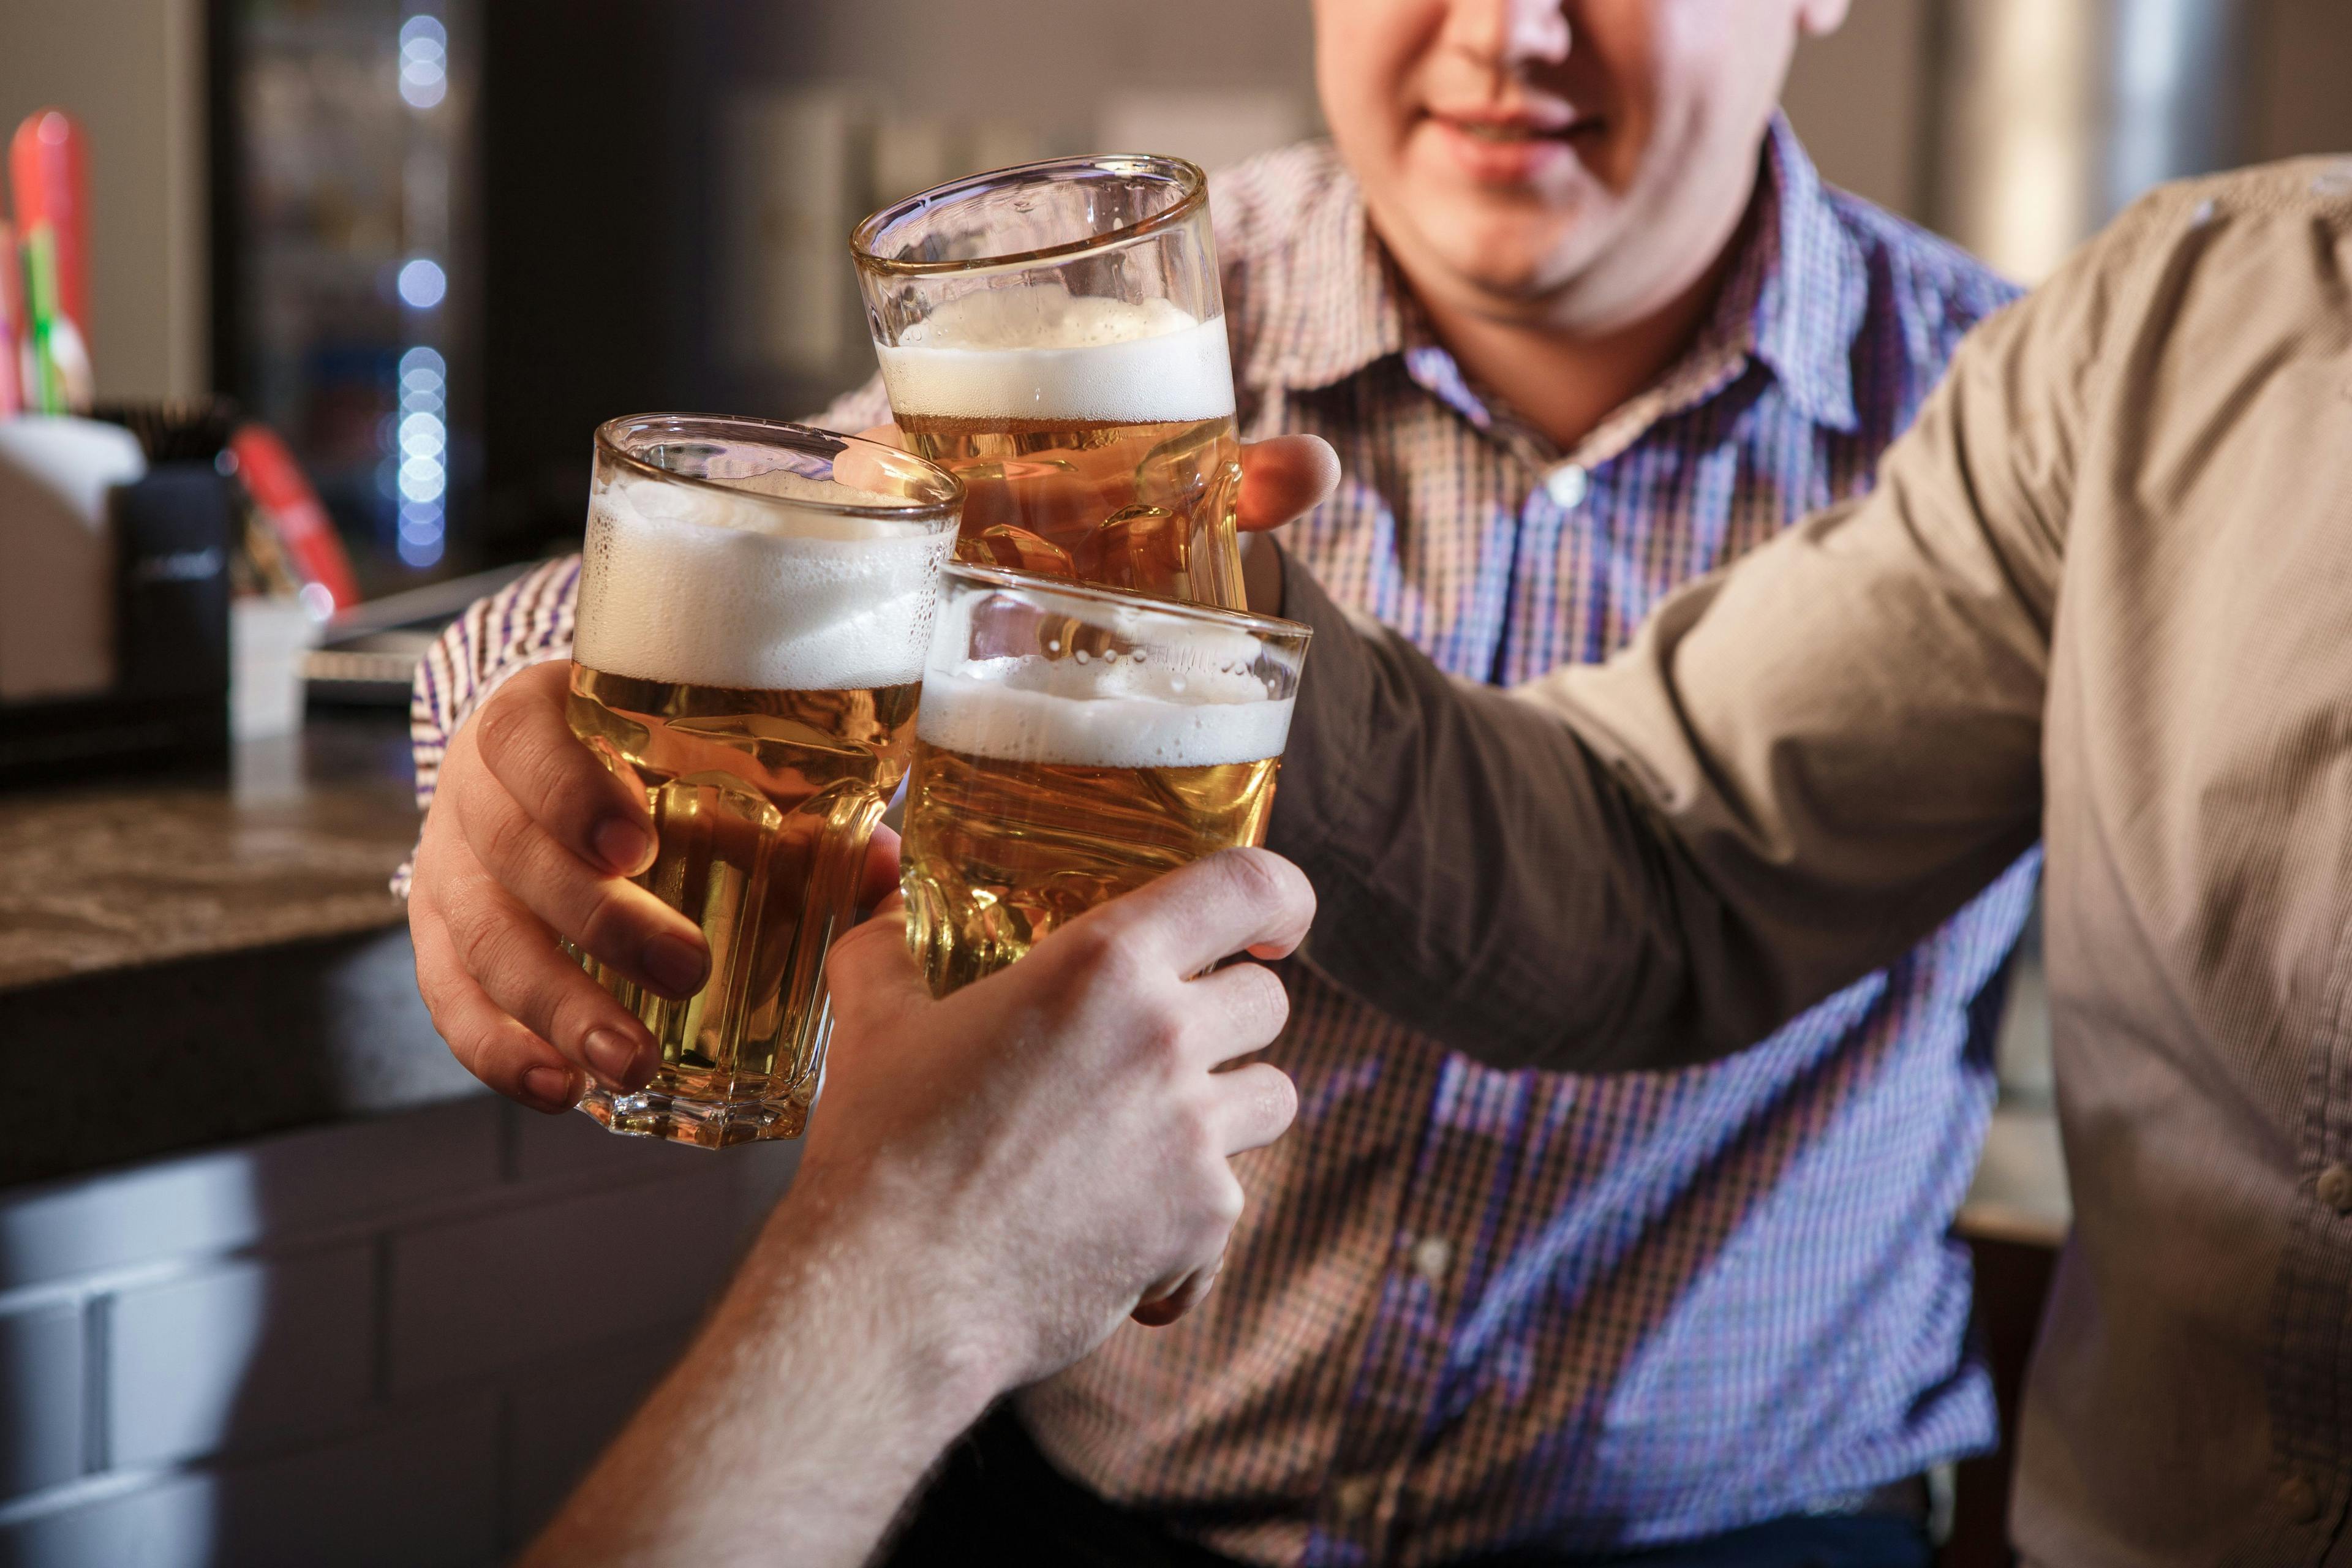 Study Results Show Moderate Drinking May Cause Cognitive Decline